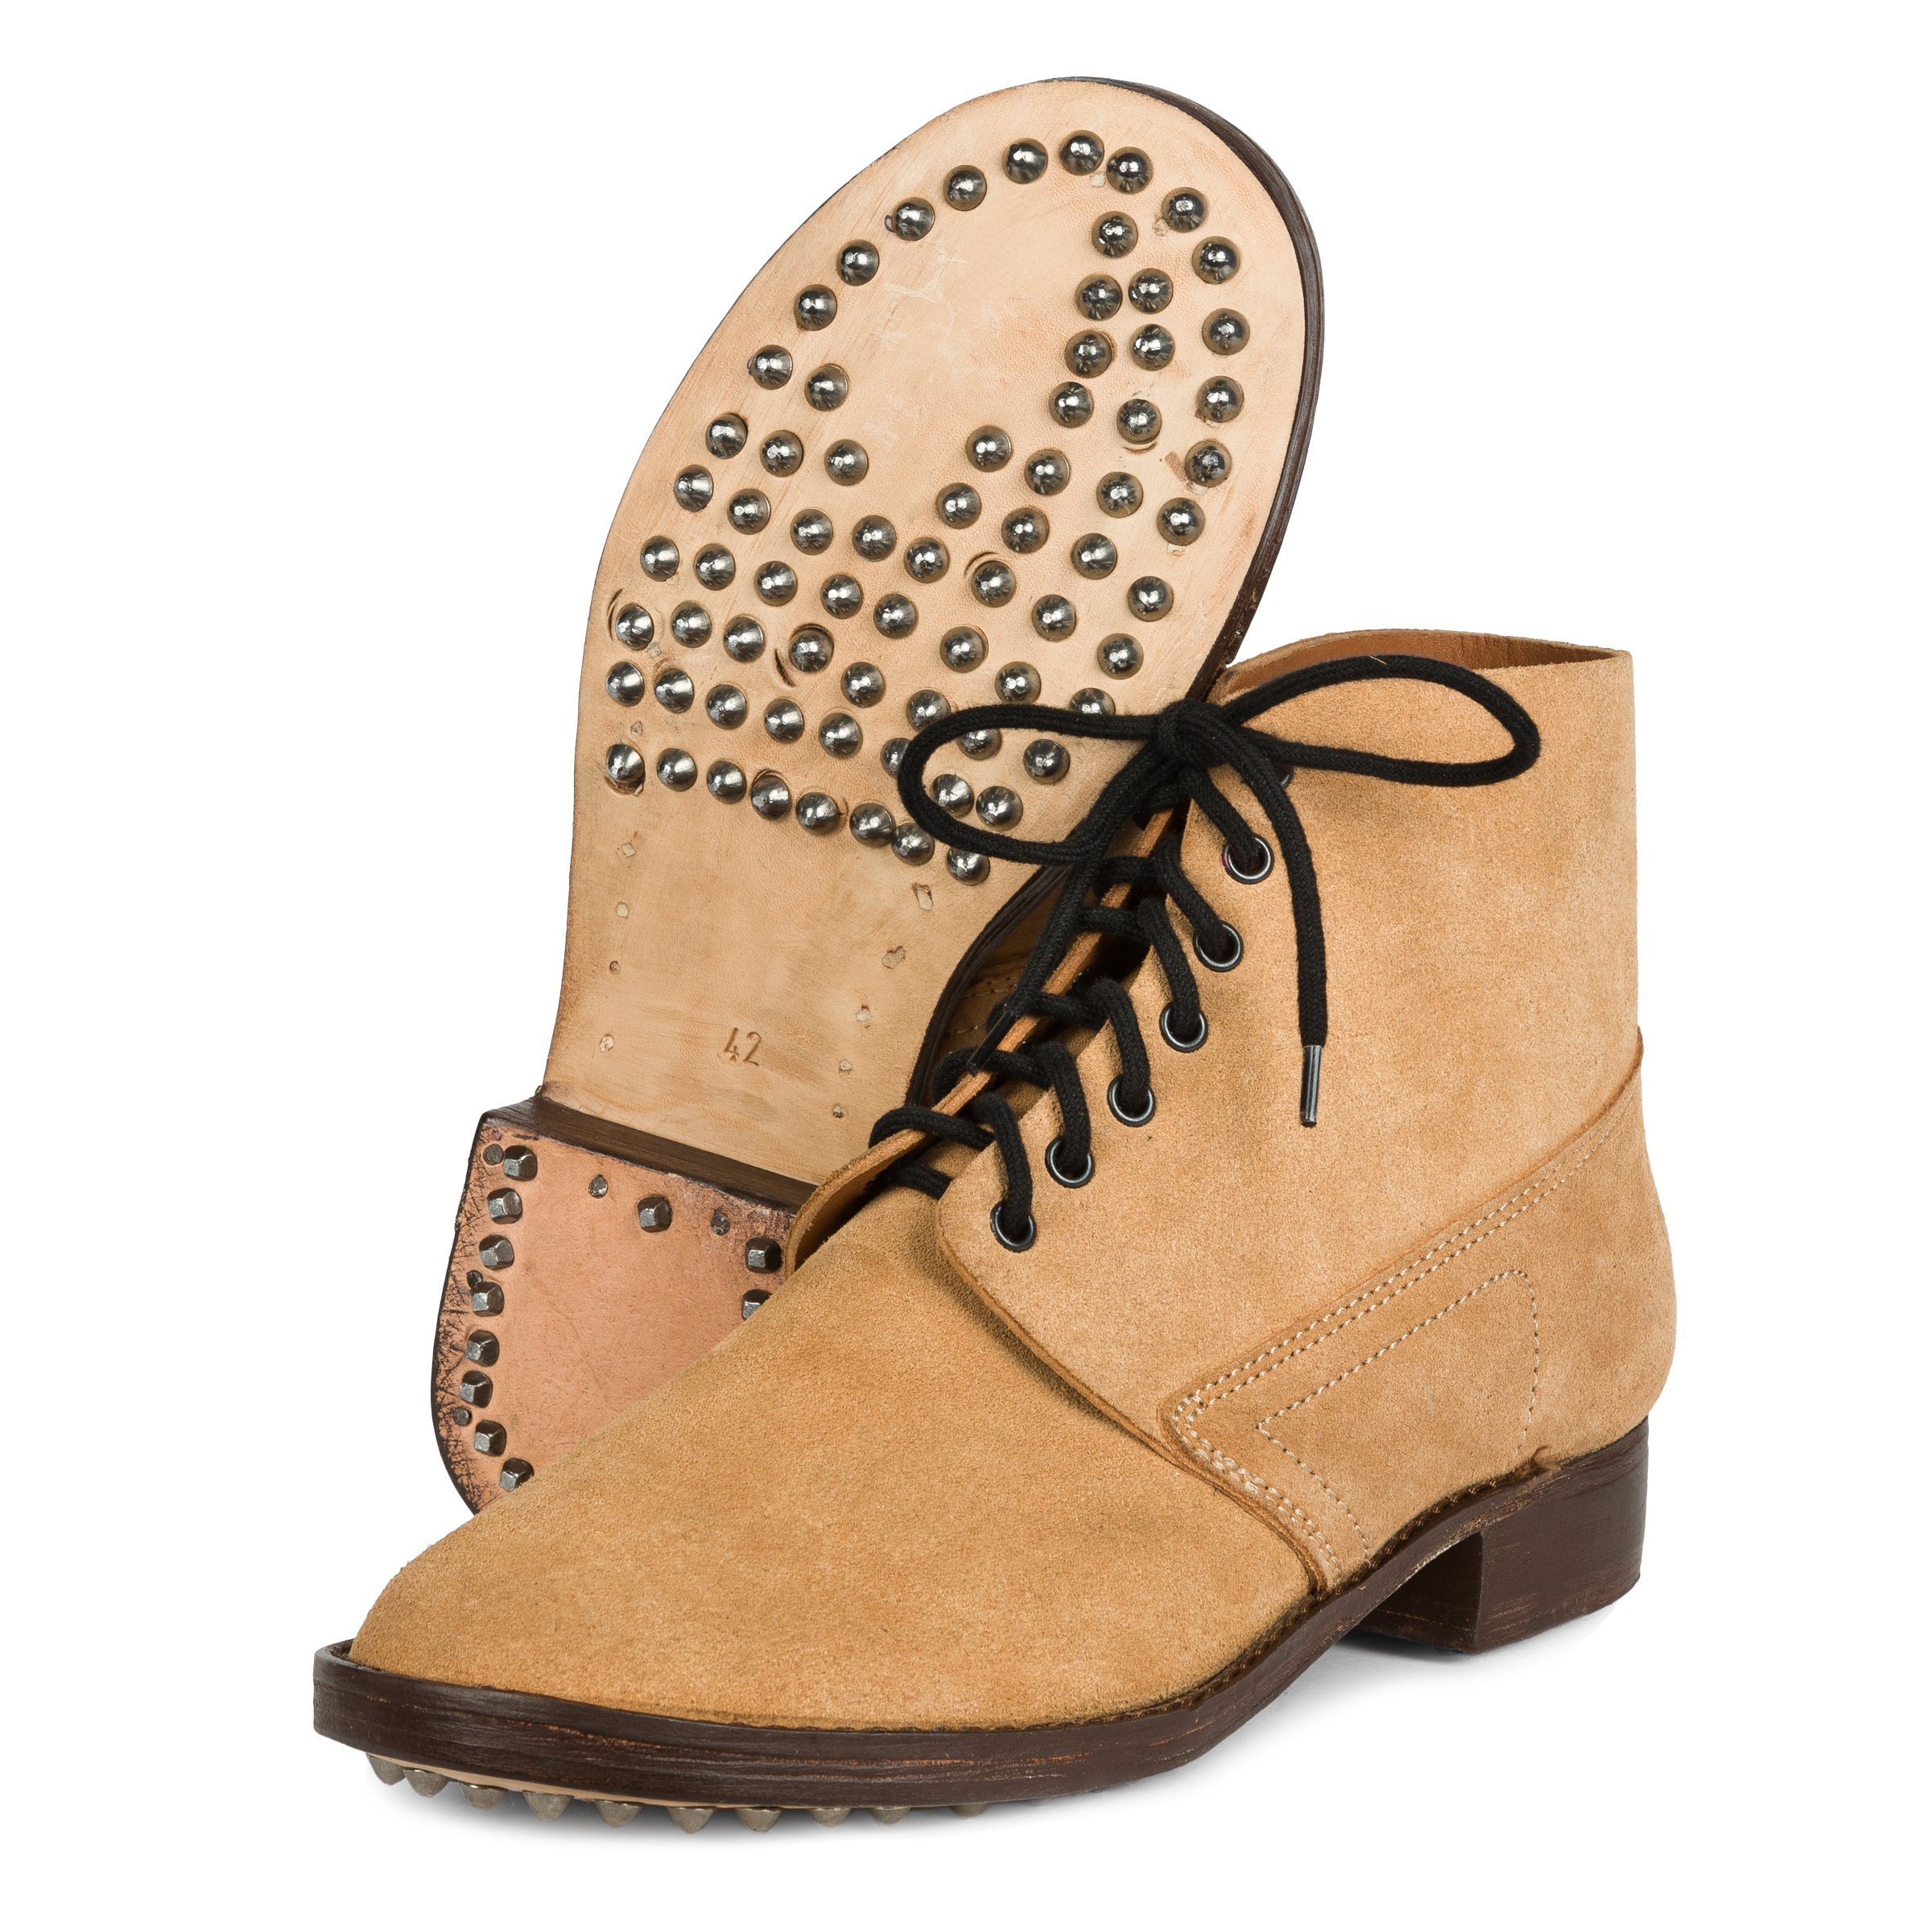 Brodequins Mle. 1912 - French Army ankle boots- brown - repro 46 146,25 € |  